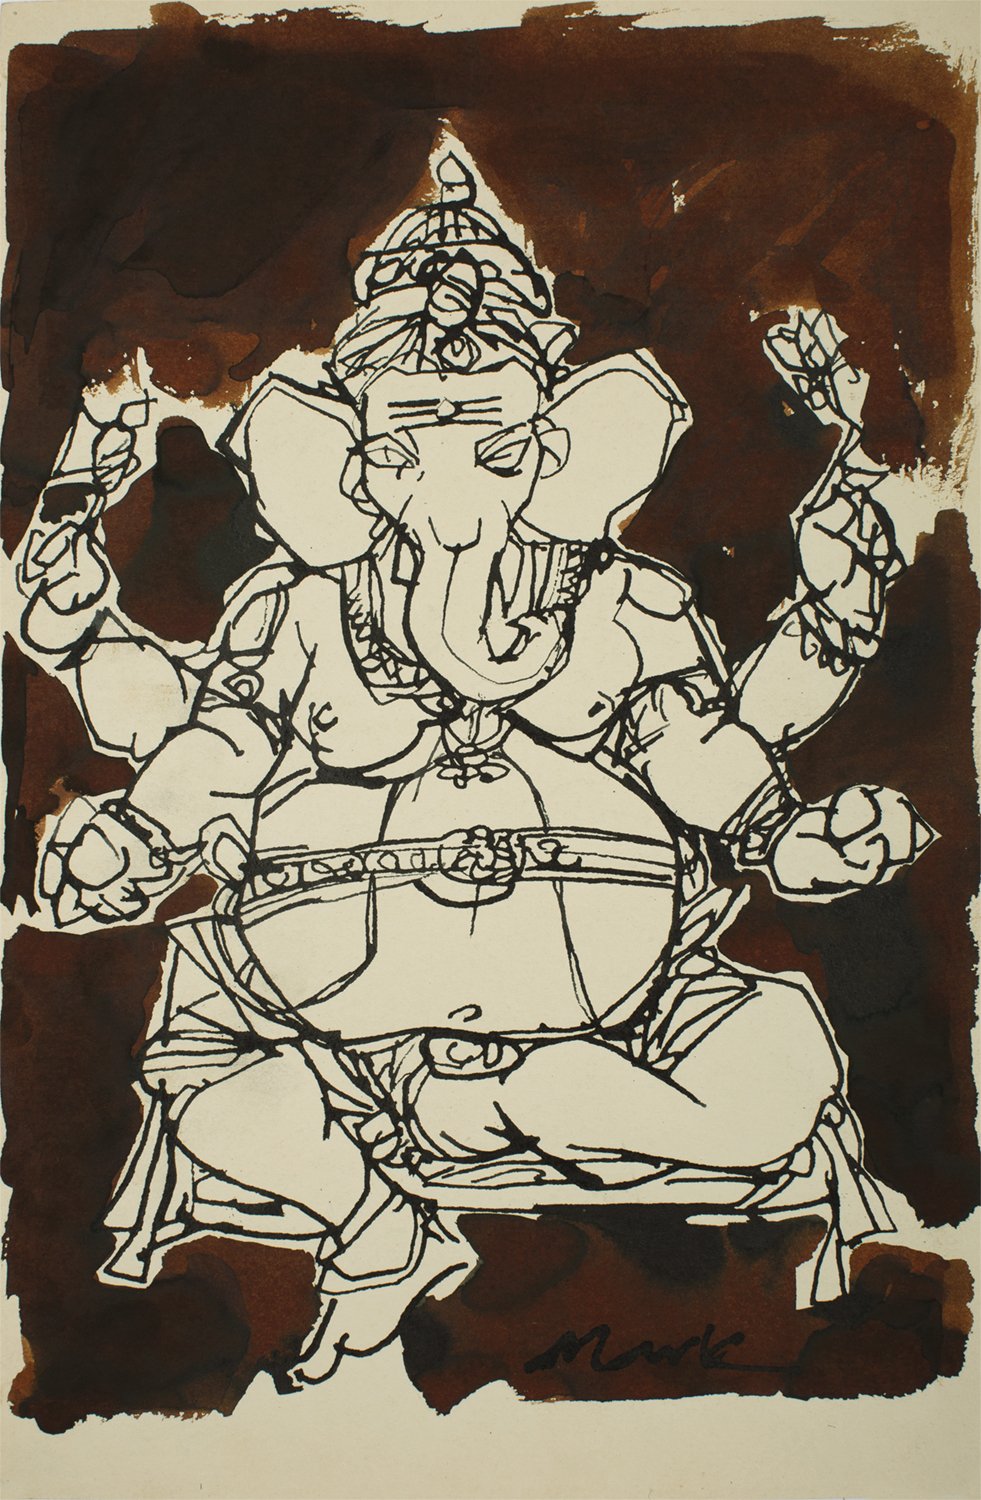 Ganesha|S. Mark Rathinaraj- Pen and Ink on Paper, , 14.5 x 9.5 inches